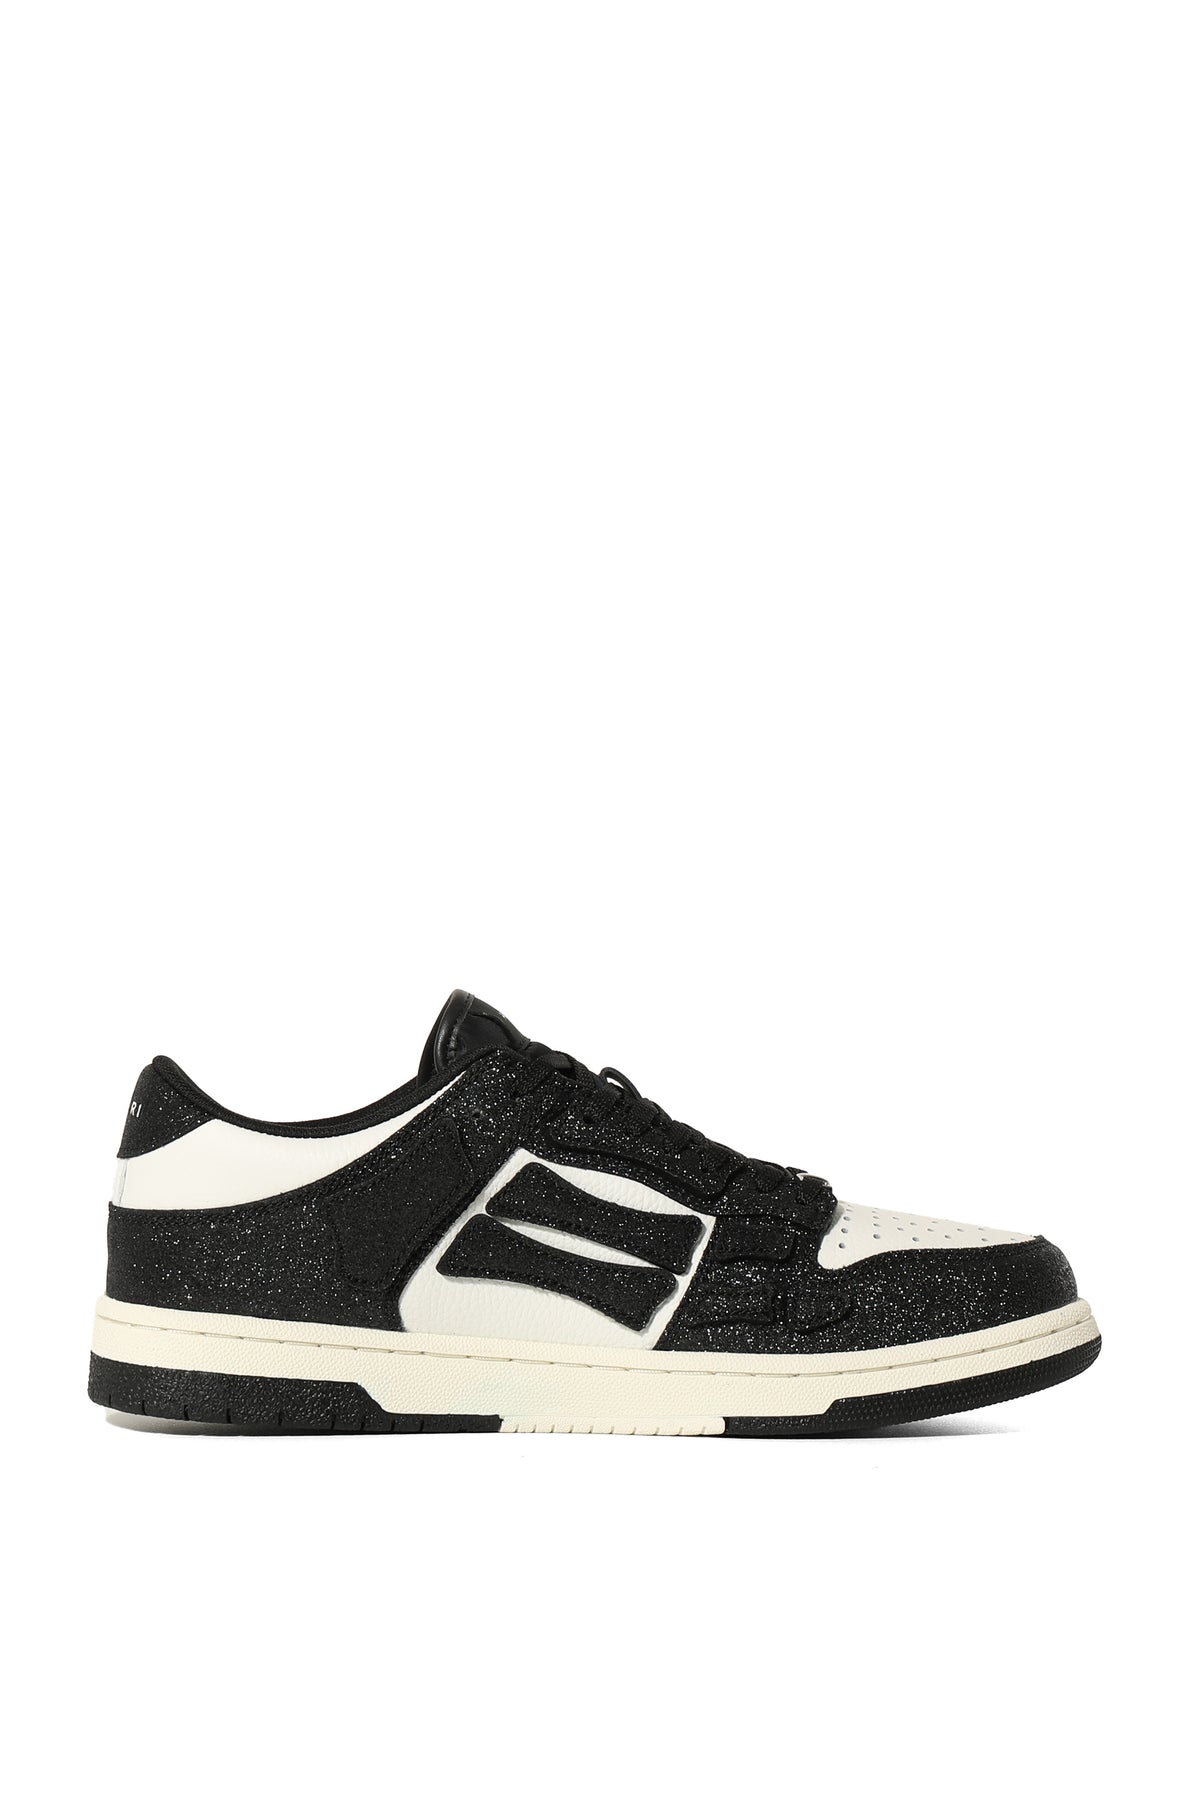 LouisVuitton LV408 Trainers Suede/Gray Flannel, Drops